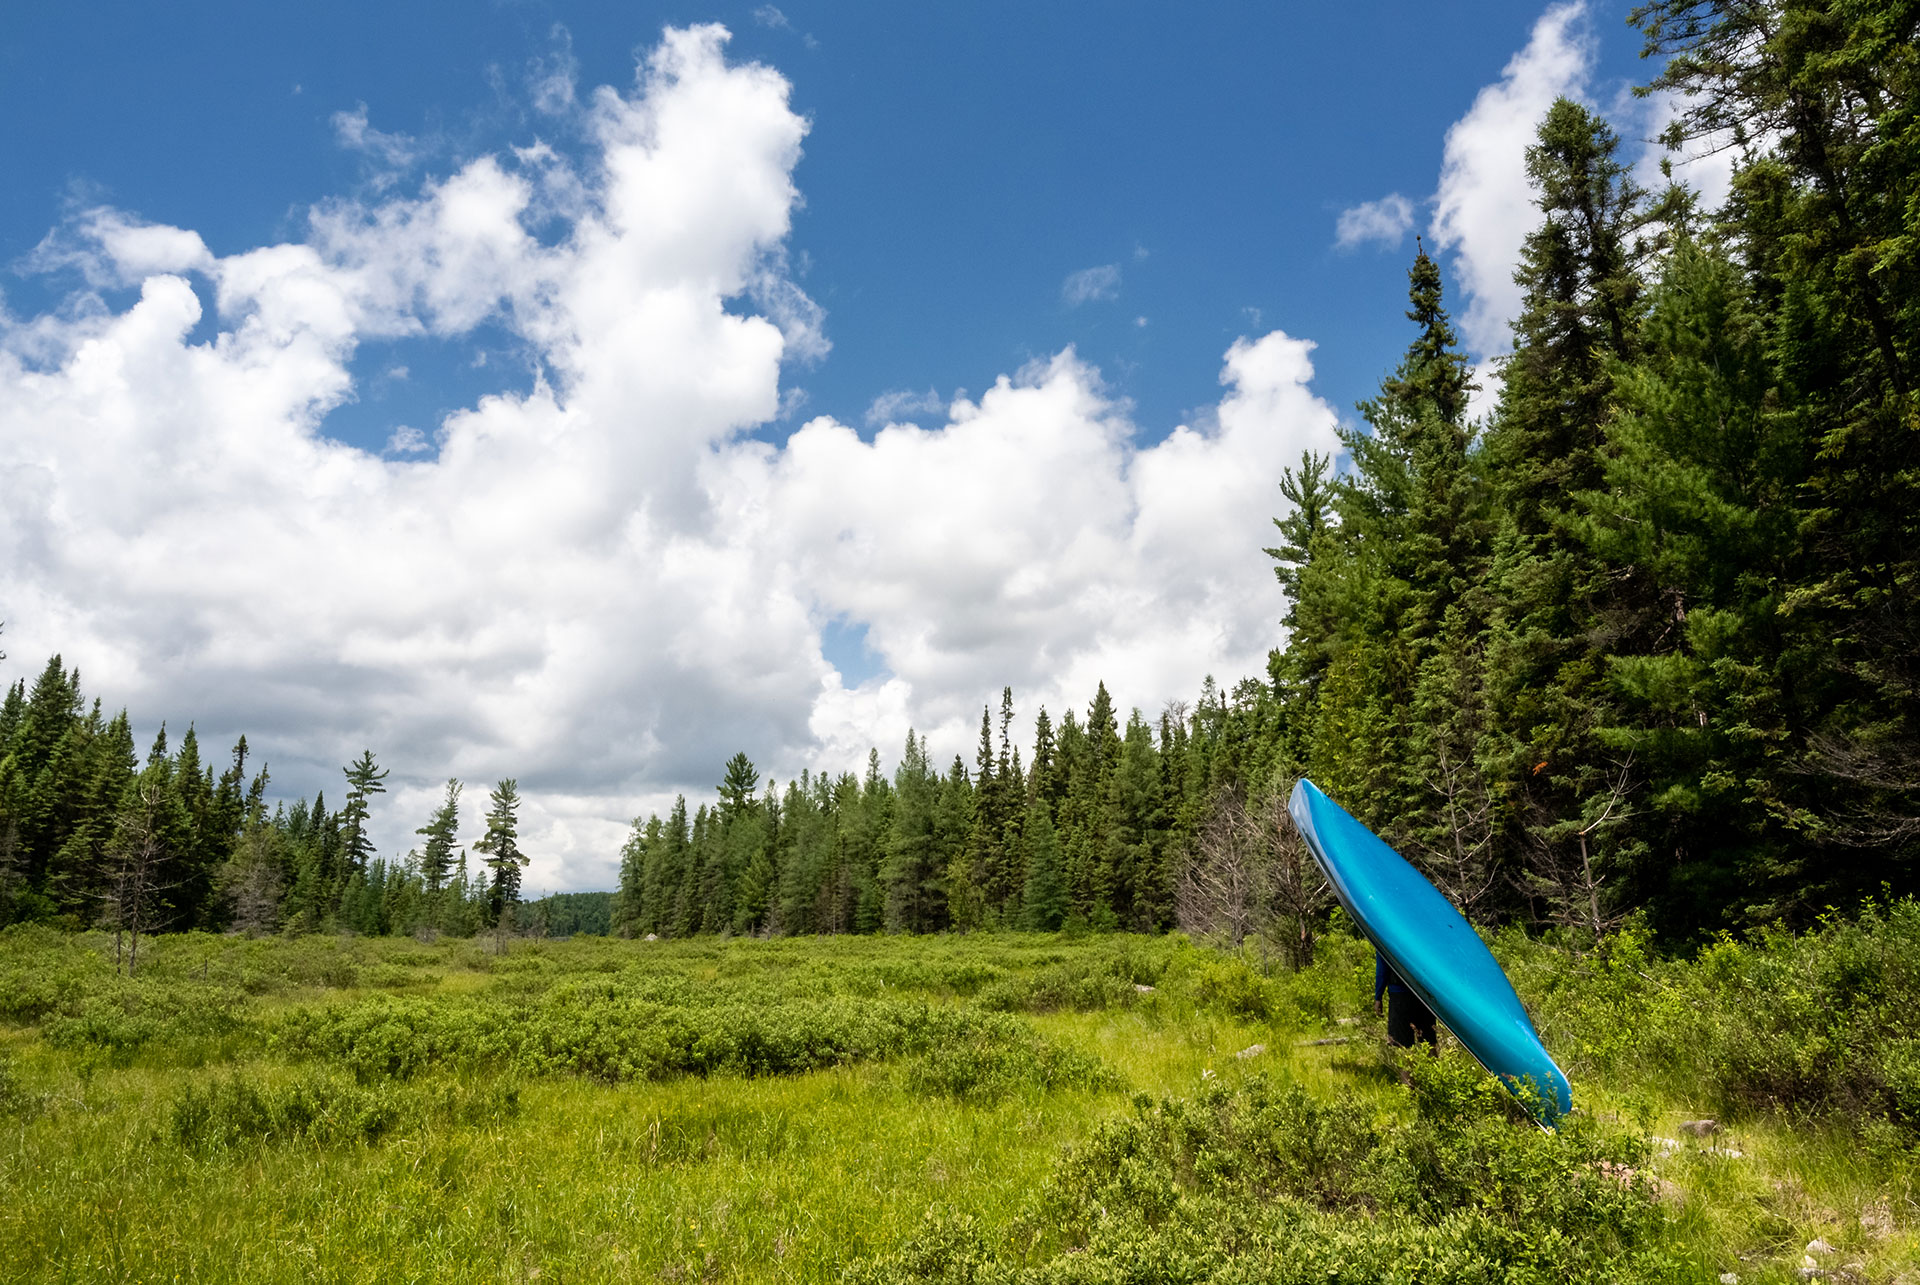 a person portages a blue canoe across a lush meadow